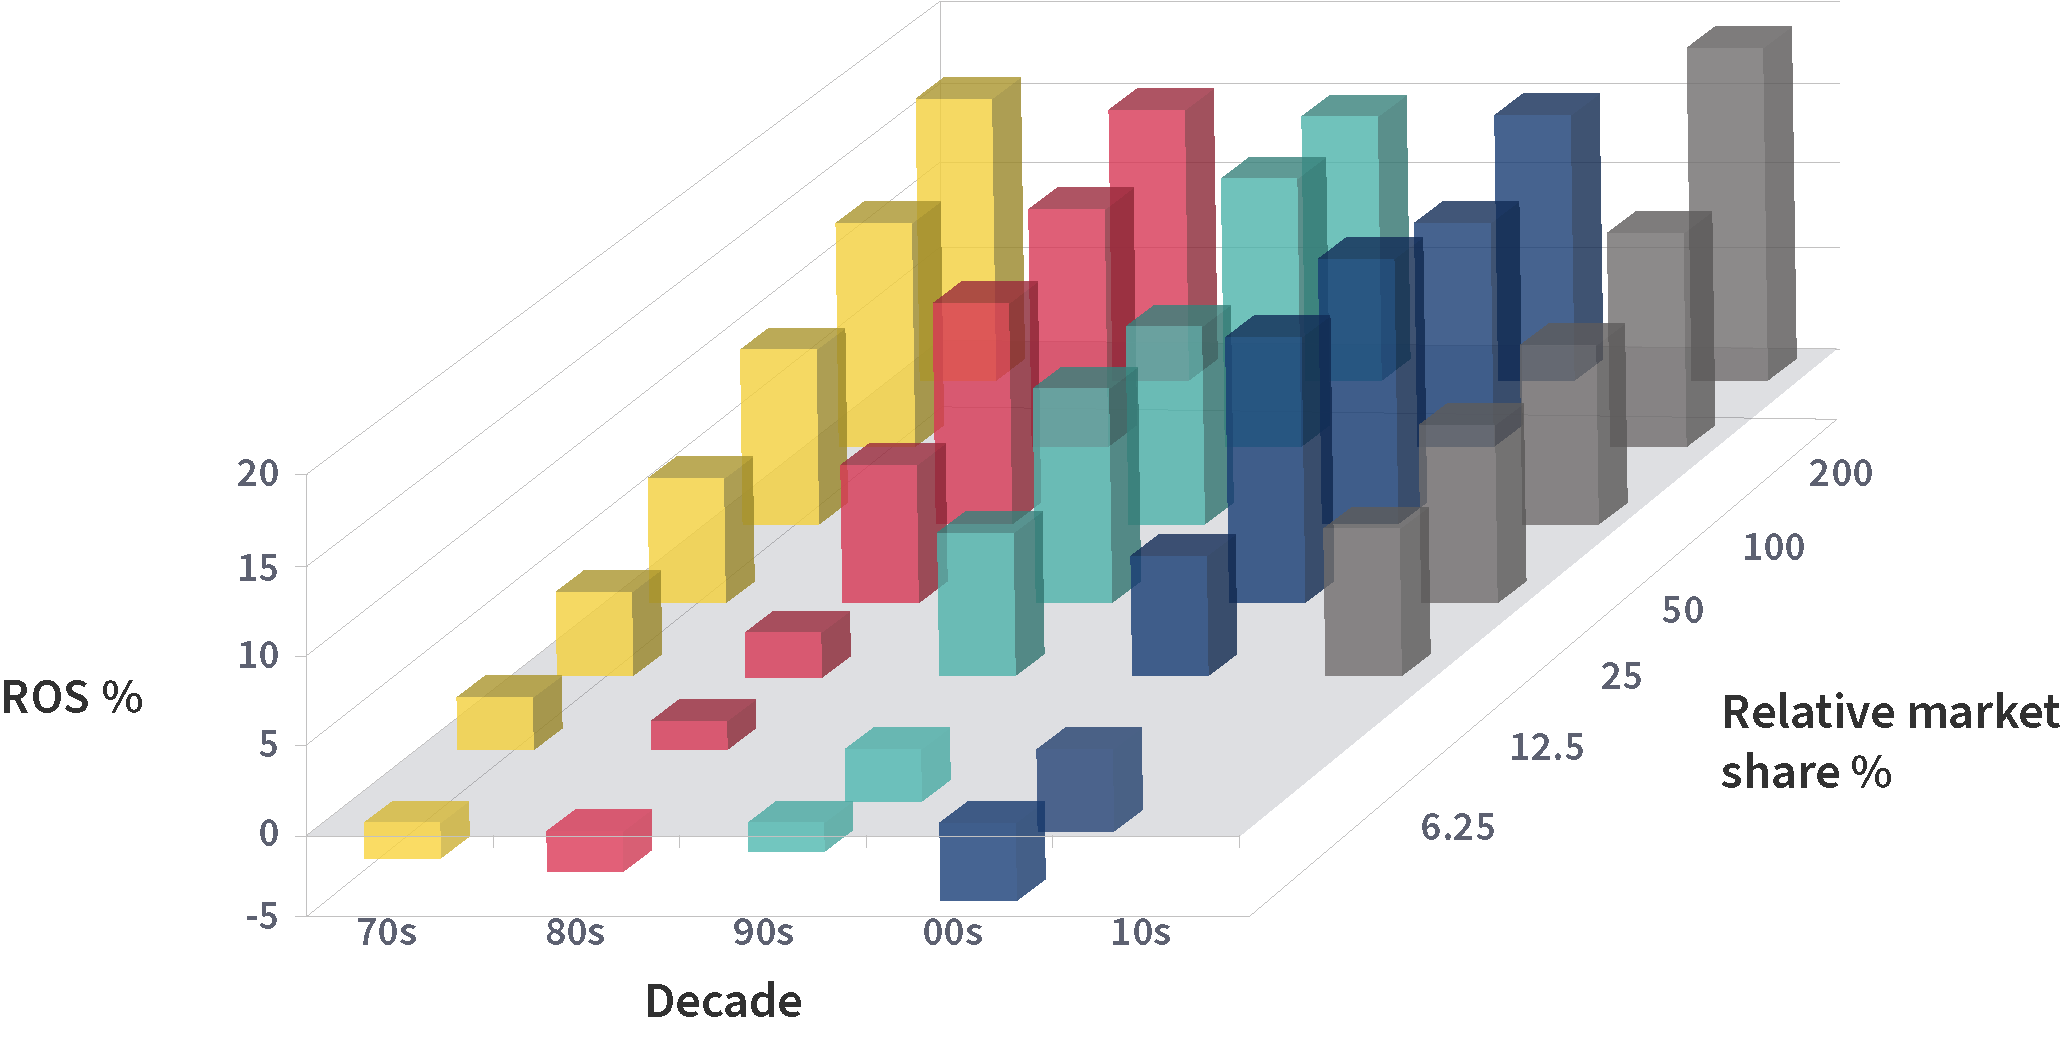 The second main profit driver is relative market share (your share divided by the three largest competitors: this is a stronger factor than either share relative to the single largest competitor or just absolute market share on its own). To get a full view we’ve sorted each decade into seven bars where the extreme bars have relatively few observations. Two things stand out: first, the effect is primarily time-independent, especially in the main range of 12.5% to 200% relative market share, where the slope remains the same. But maybe something is starting to happen at the extremes in the current century: very dominant businesses doing particularly well, and very small players being very scarce (perhaps the PIMS message is getting through and they are re-focussing on a niche where they have a decent share). This will need confirming in the 2020s.